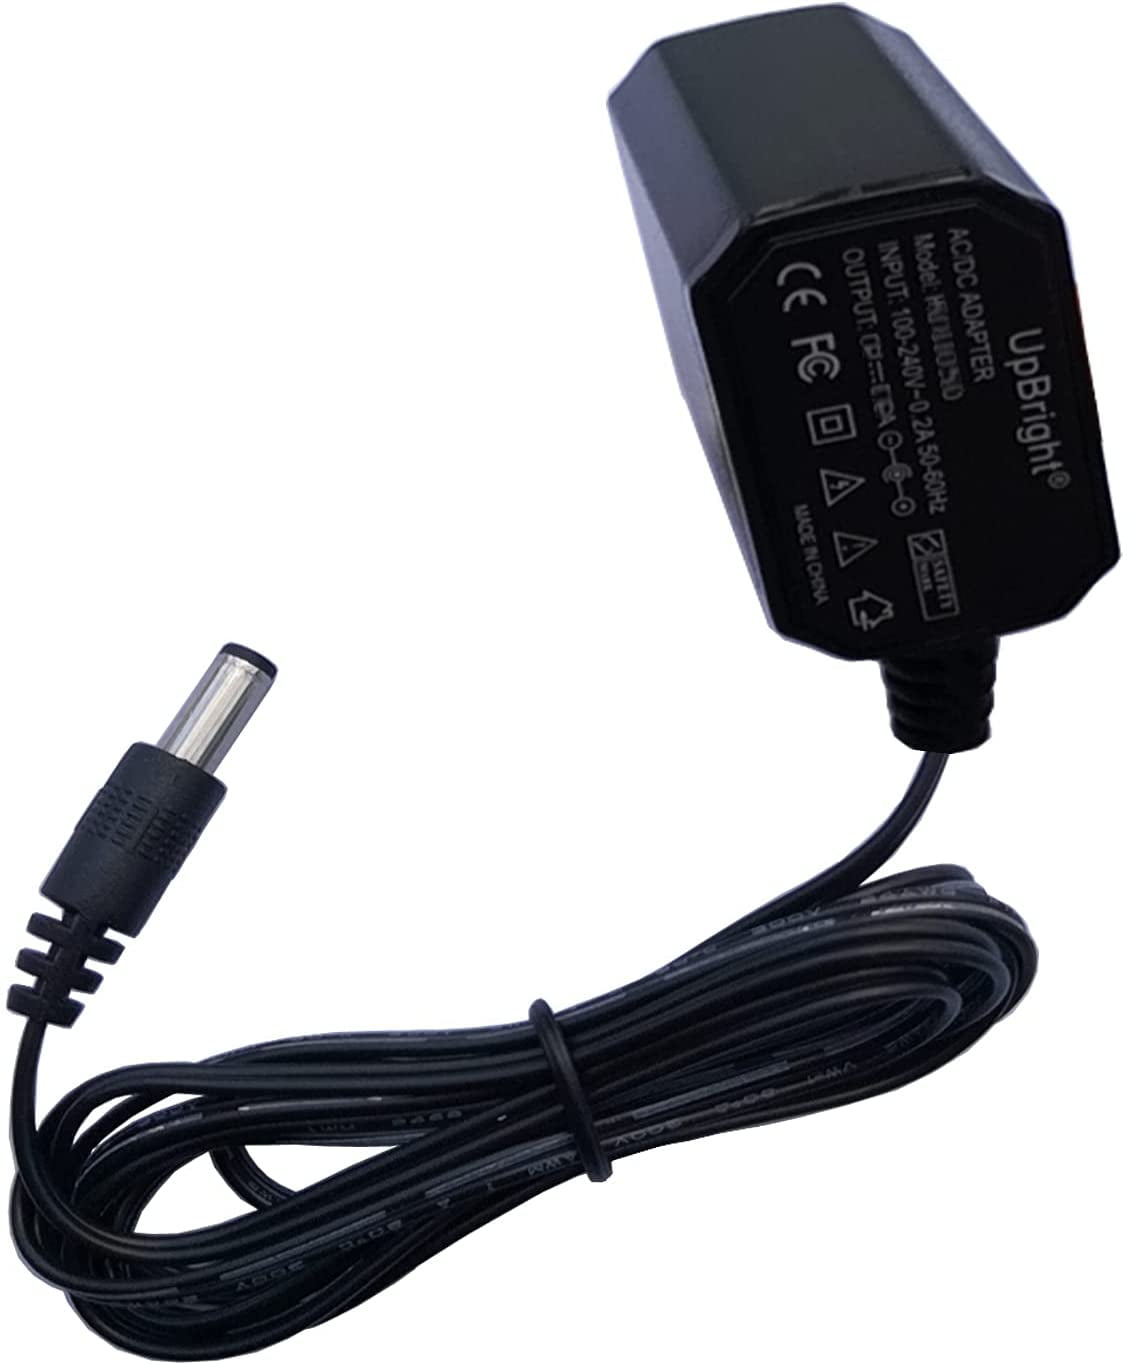 Black & Decker Class 2 Power Supply Charger Only UA120015E Ships Fast!!!